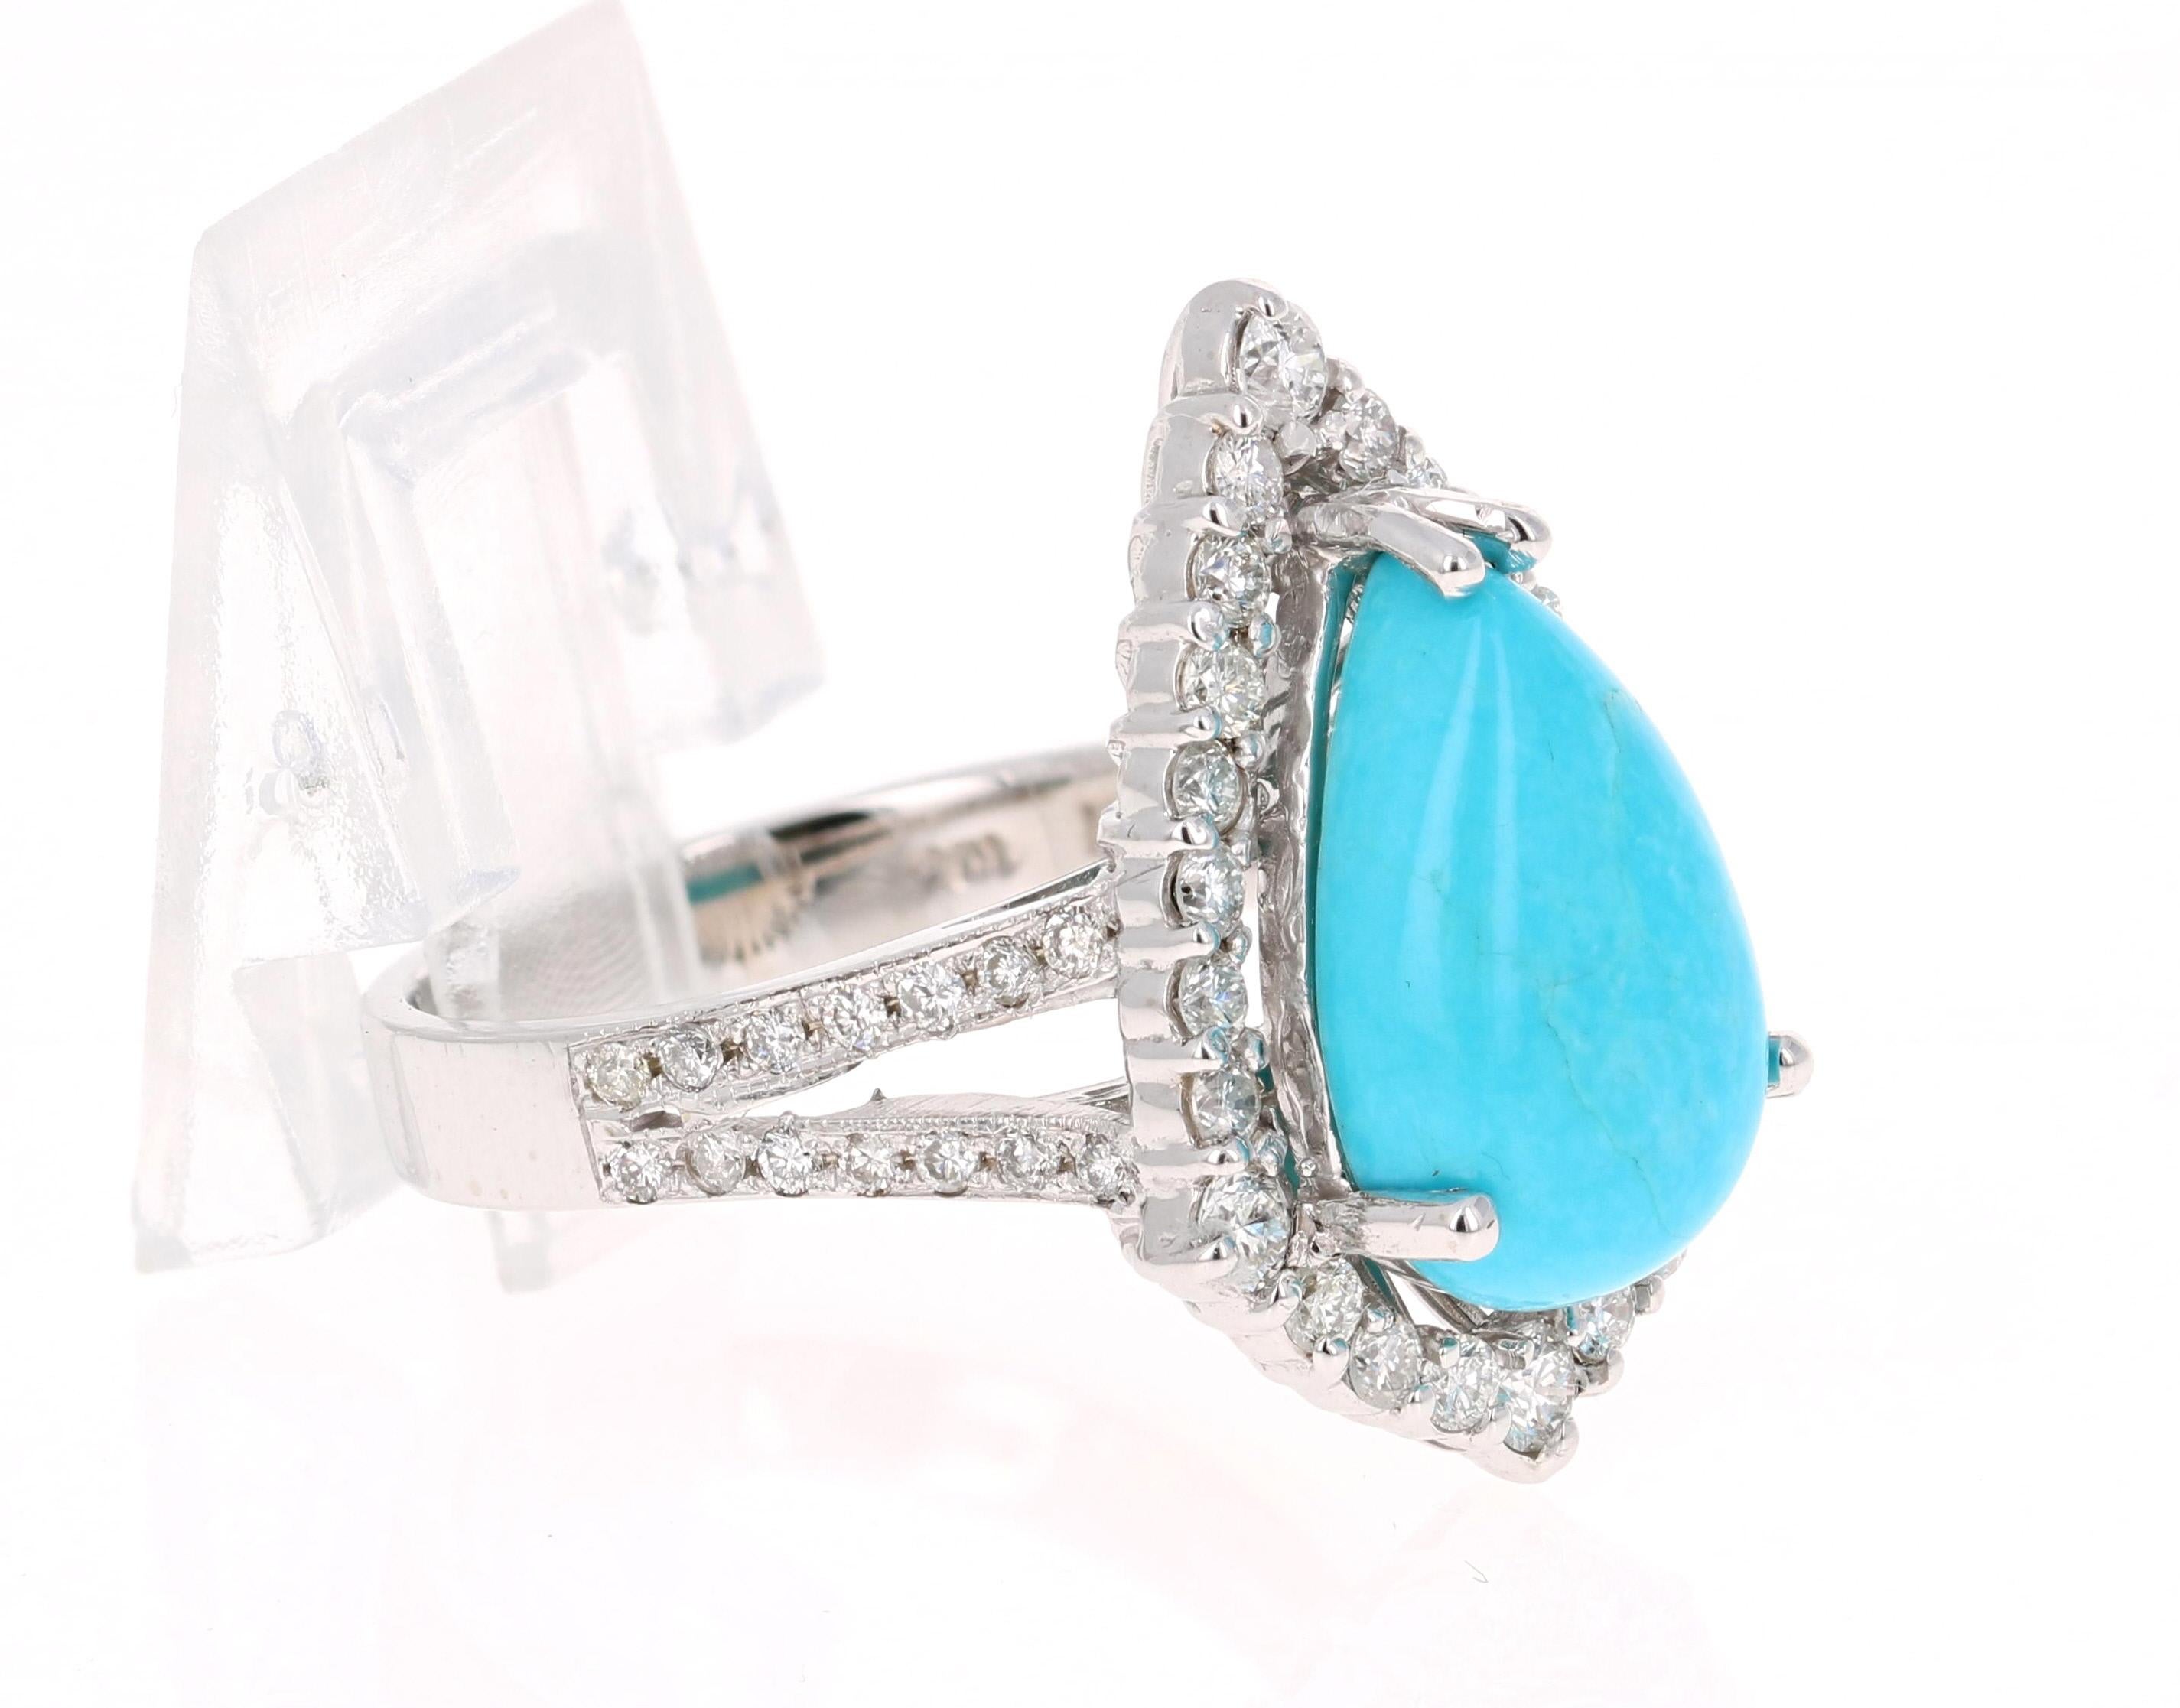 
The Pear Cut Turquoise is 4.53 Carats and is surrounded by a cluster of beautifully set diamonds. There are 50 Round Cut Diamonds that weigh 1.01 Carats. The total carat weight of the ring is 5.54 Carats. 

The ring is crafted in 14 Karat White